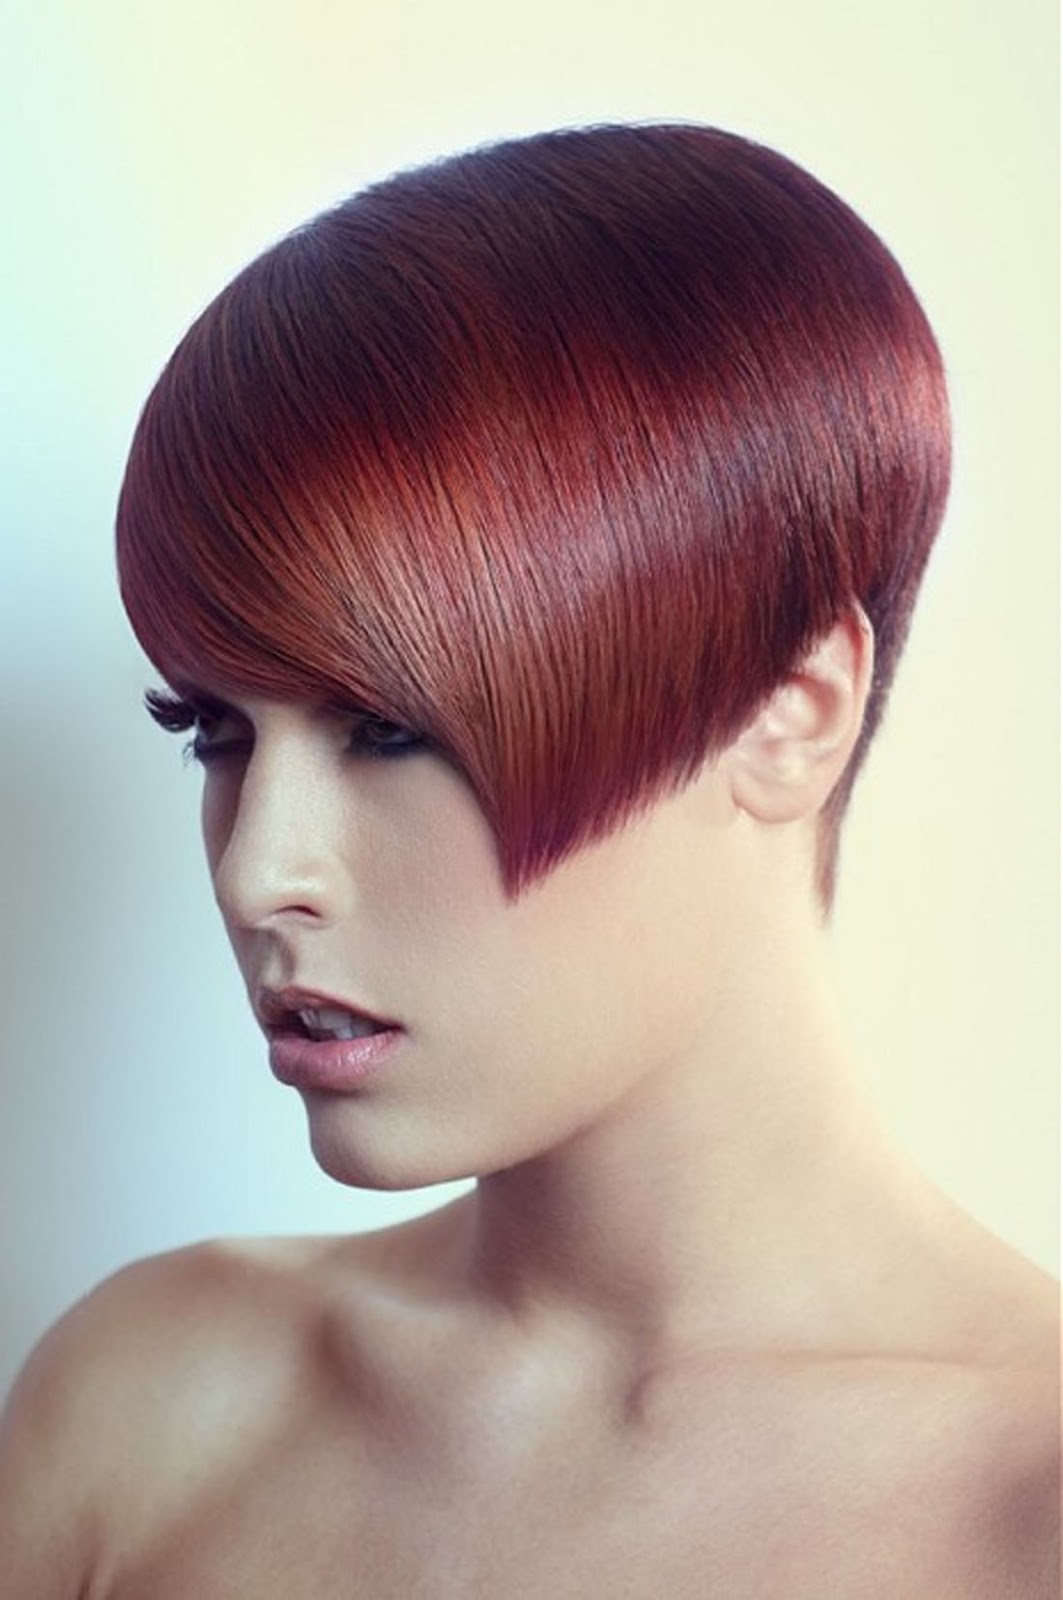 cute short hairstyles and color